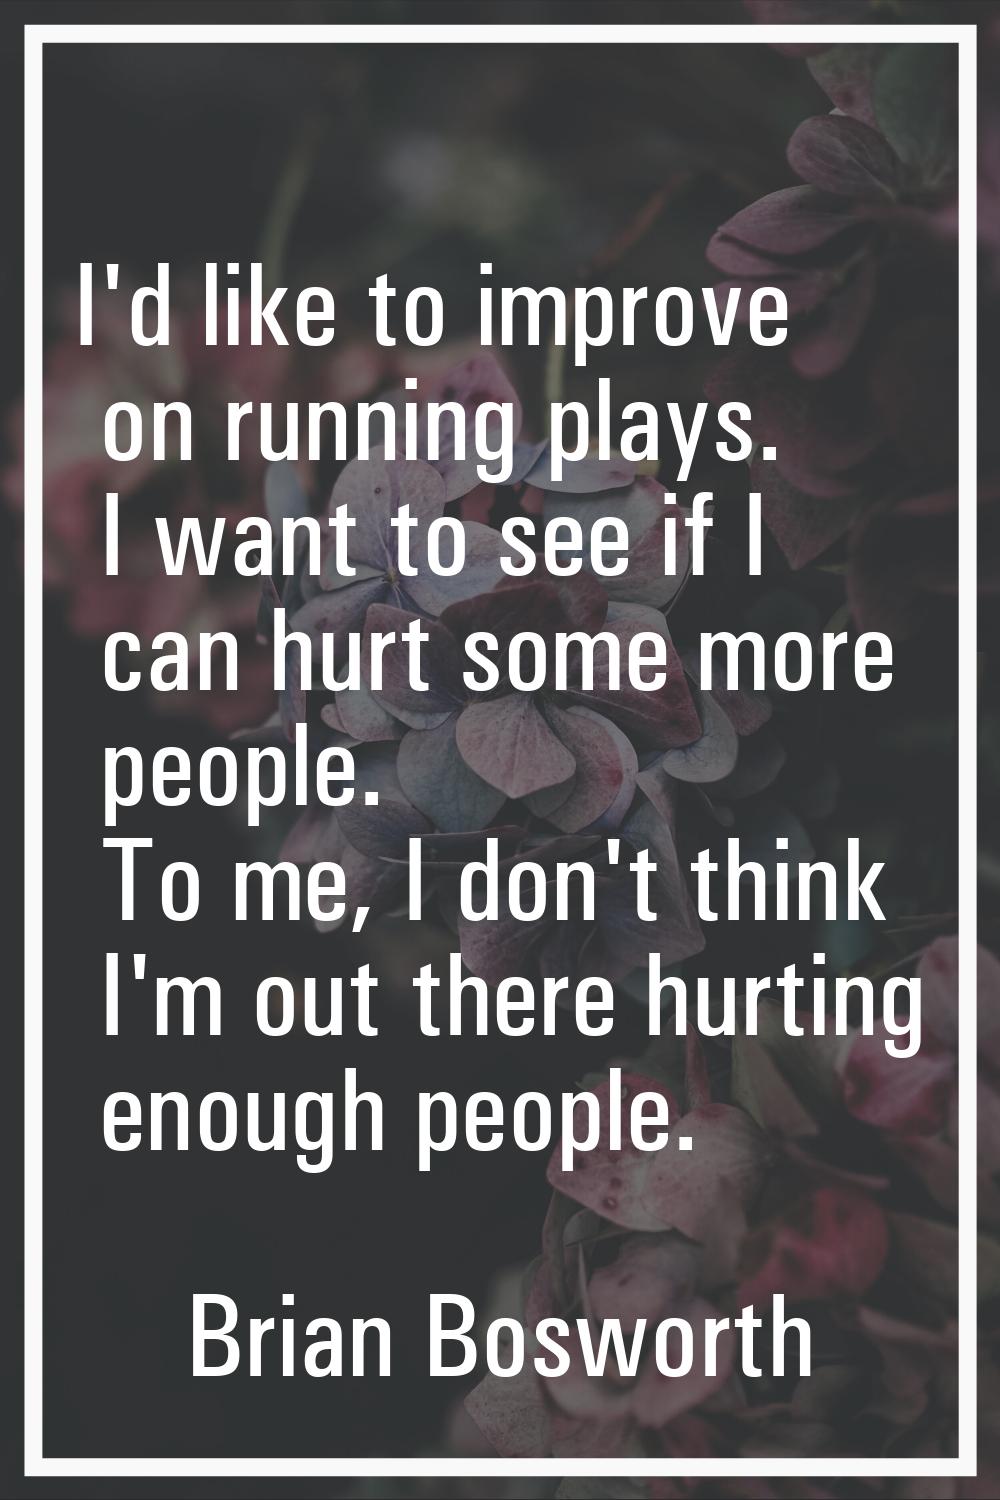 I'd like to improve on running plays. I want to see if I can hurt some more people. To me, I don't 